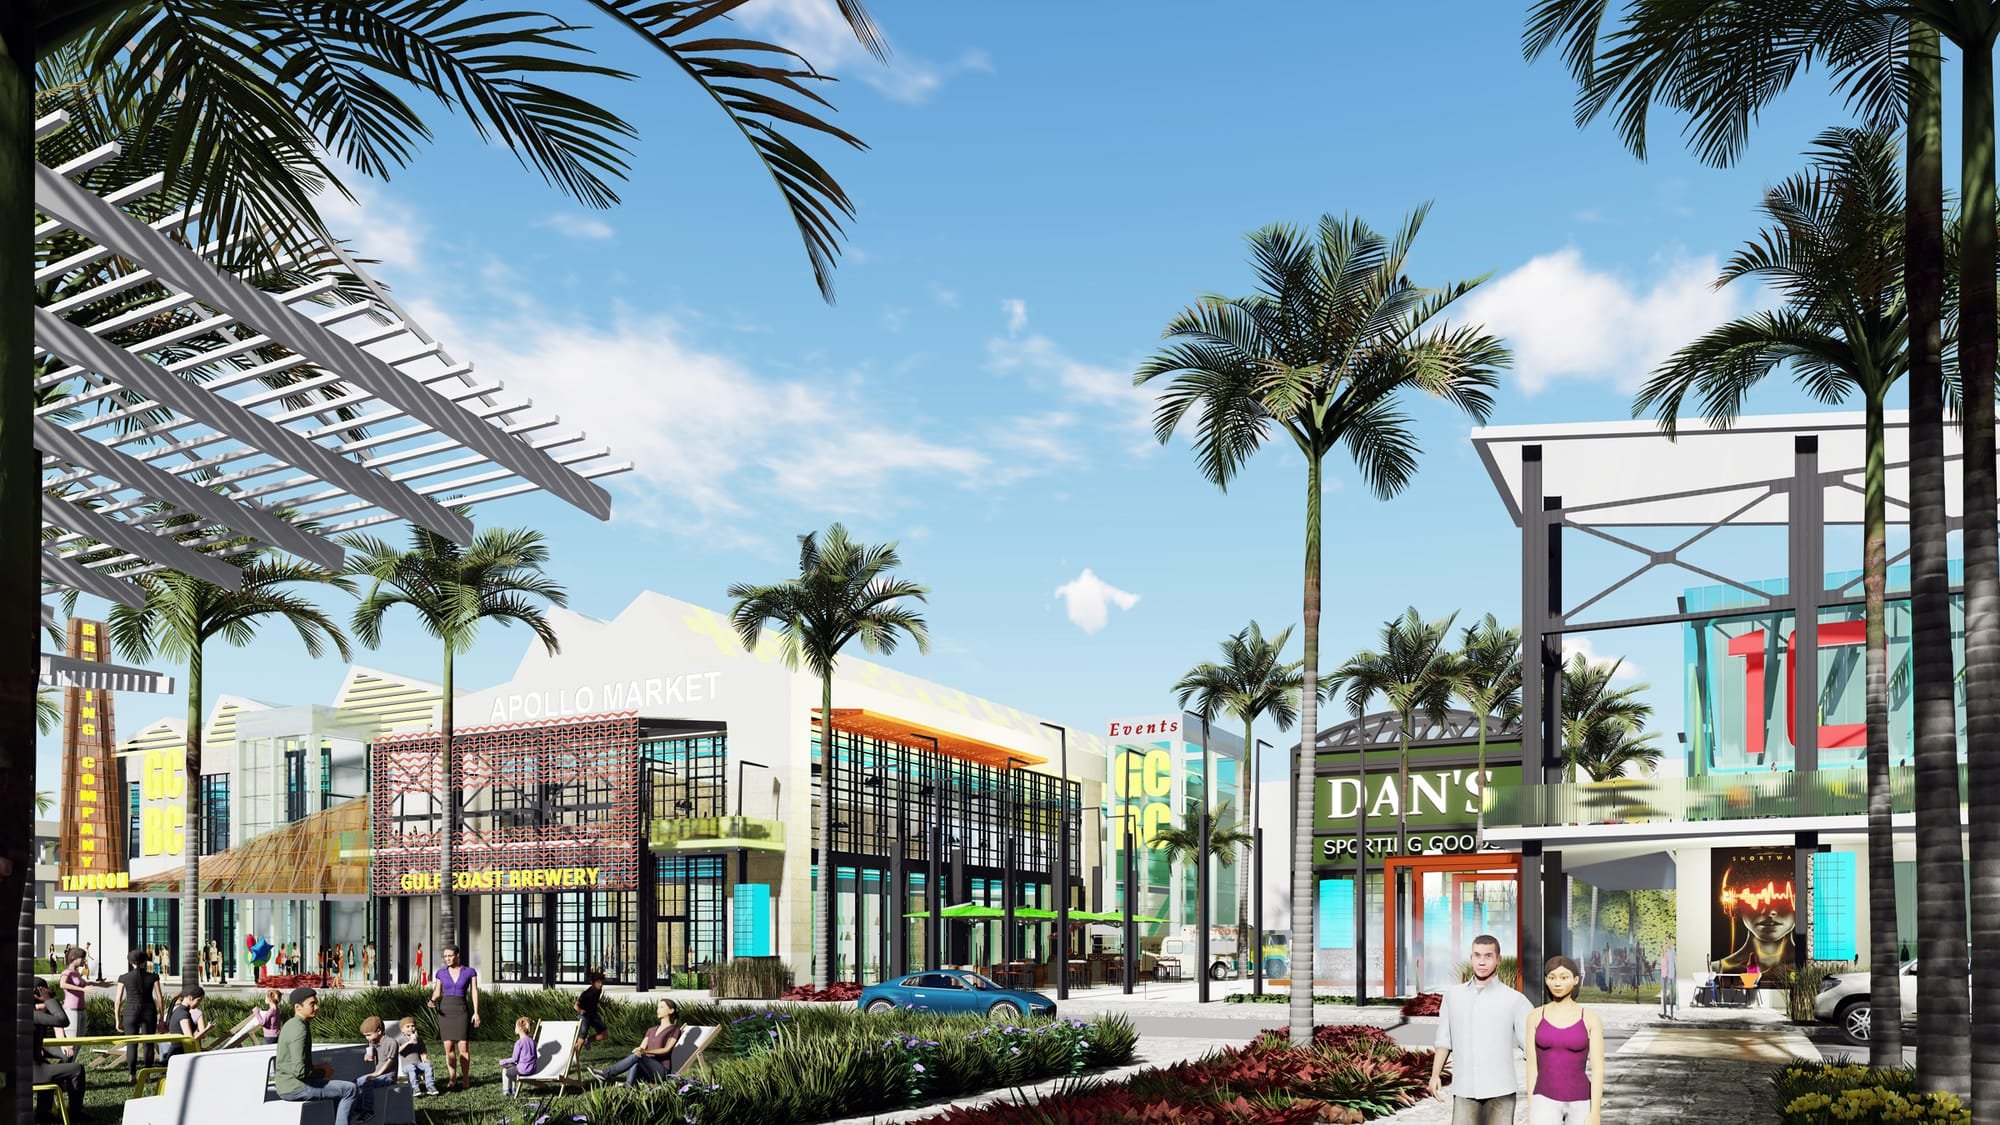 LAKE NONA TOWN CENTER - BREWERY AND RESTAURANT STUDIES